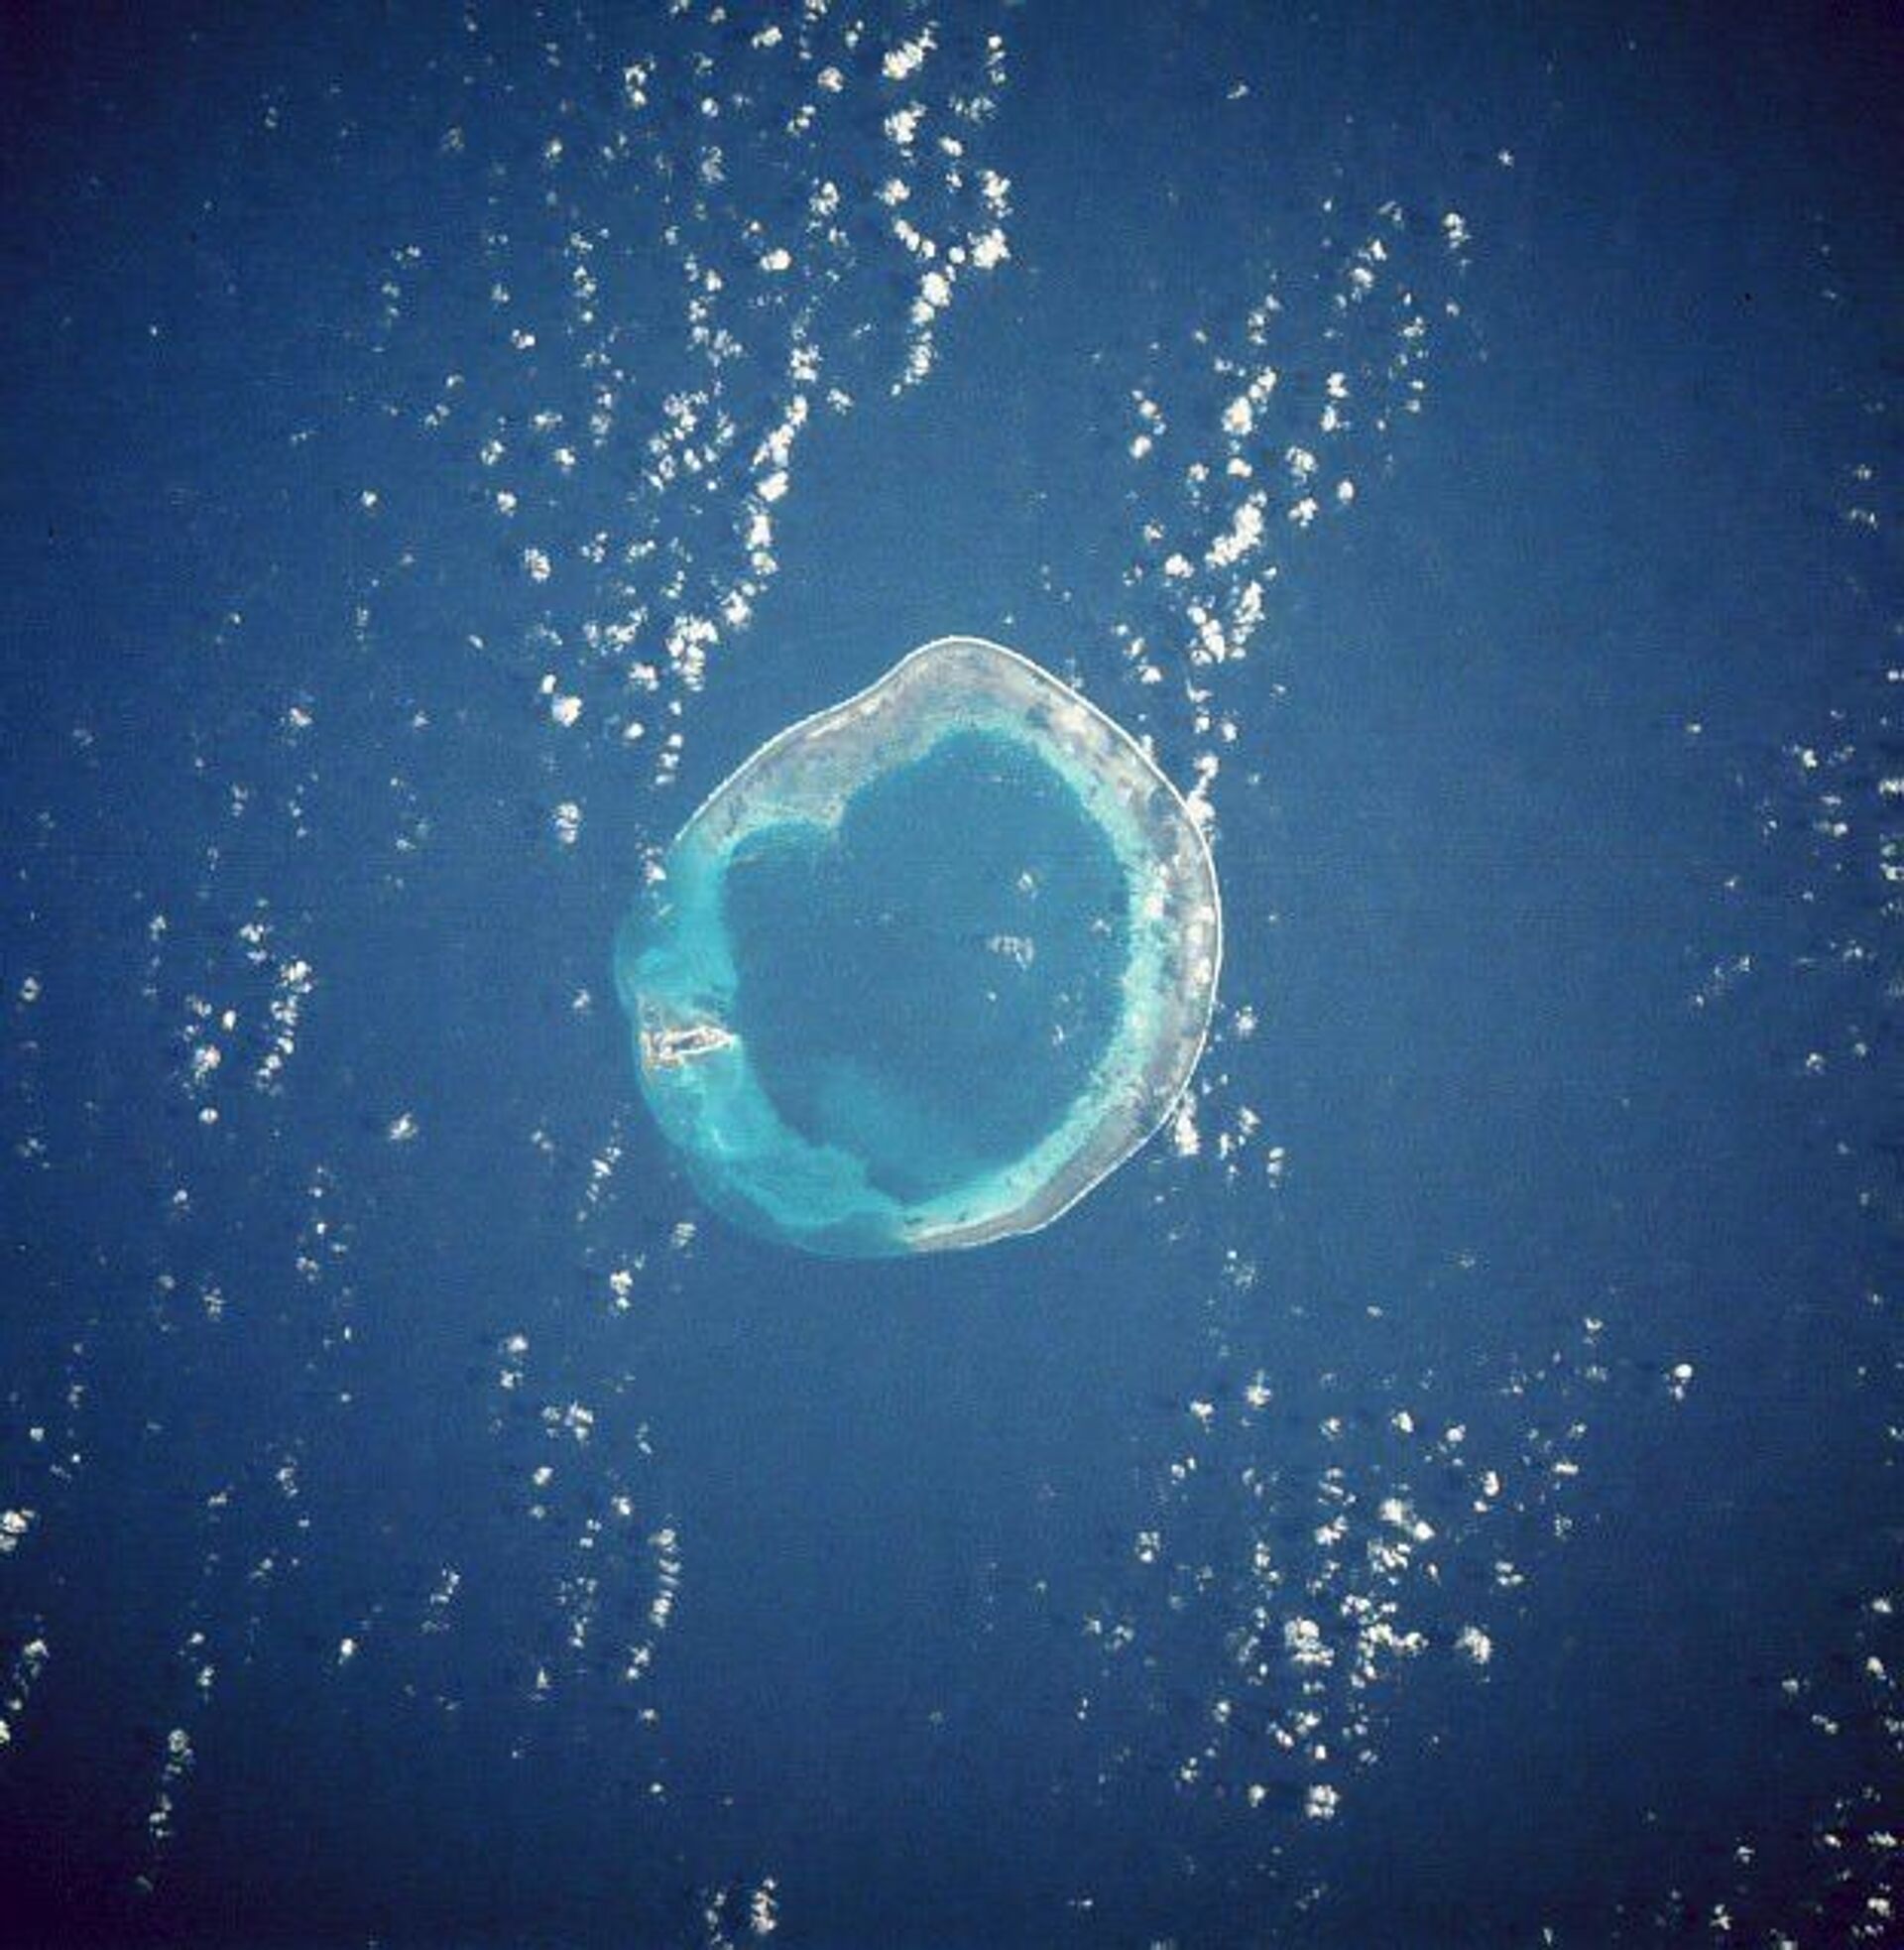 Satellite photo of Pratas (Dongsha) Island, a 590-acre island which sits 270 miles south of Taiwan and 200 miles east of China in the South China Sea. It is controlled by Taiwan. The island is on the left side - the rest is submerged reef. - Sputnik International, 1920, 04.11.2021